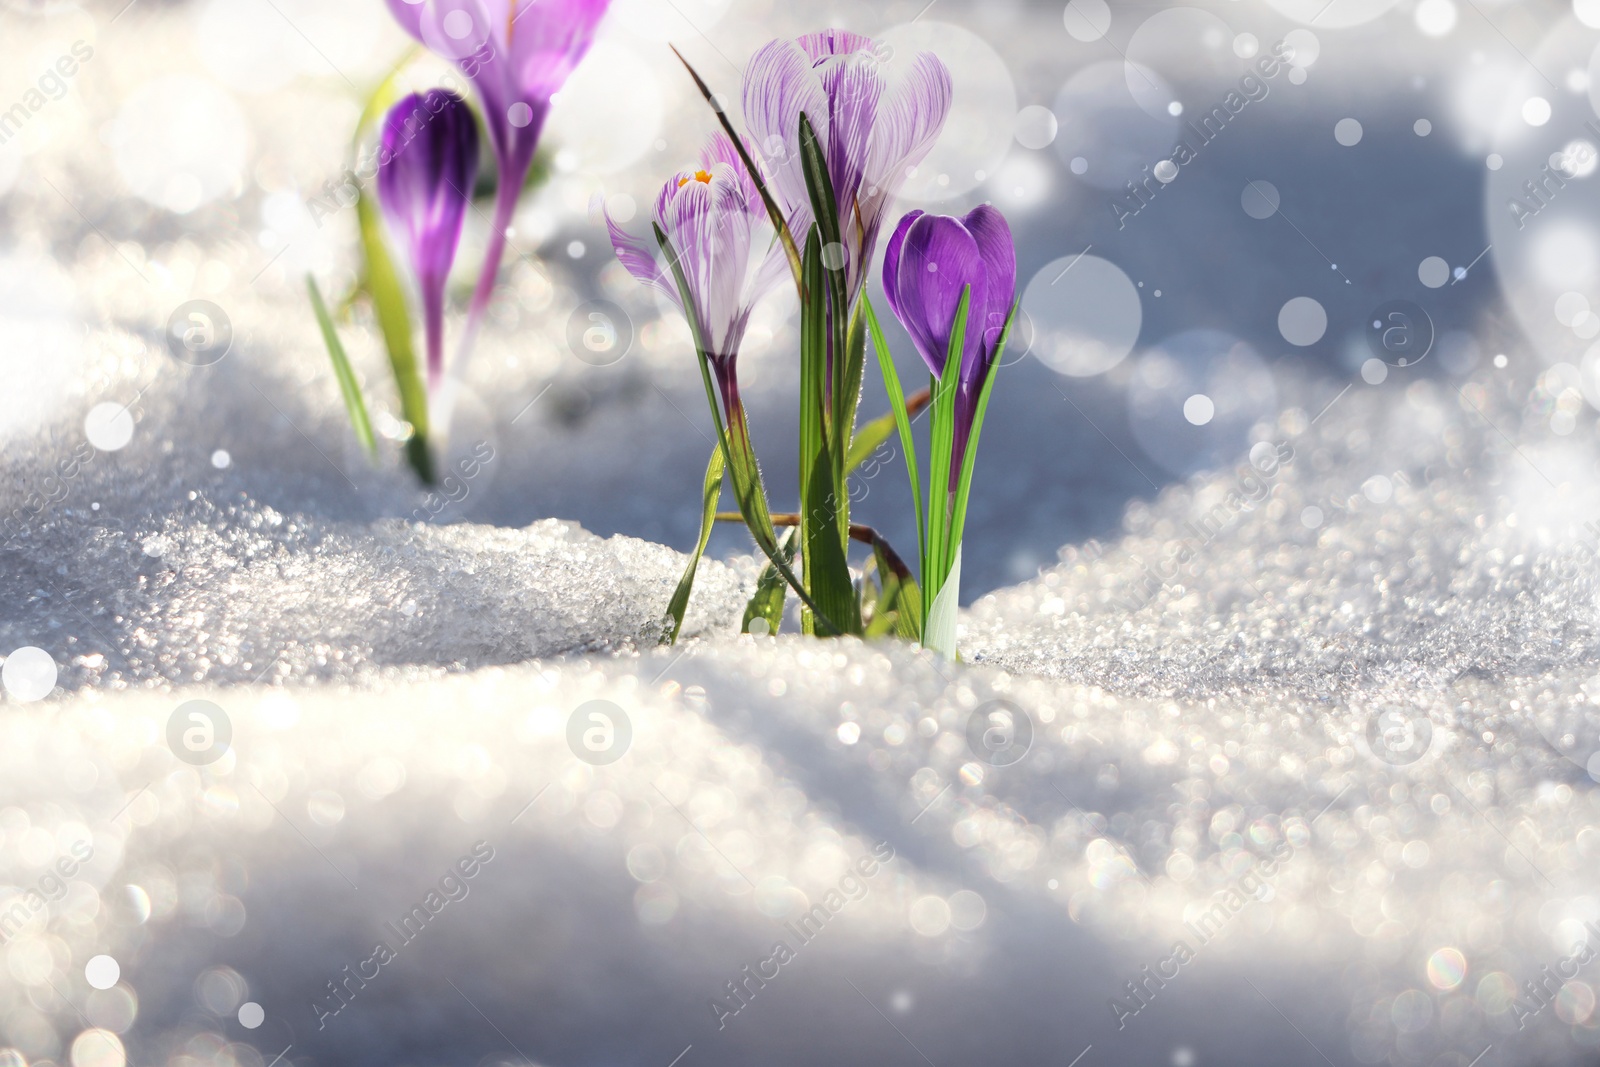 Image of Beautiful spring crocus flowers growing through snow outdoors on sunny day